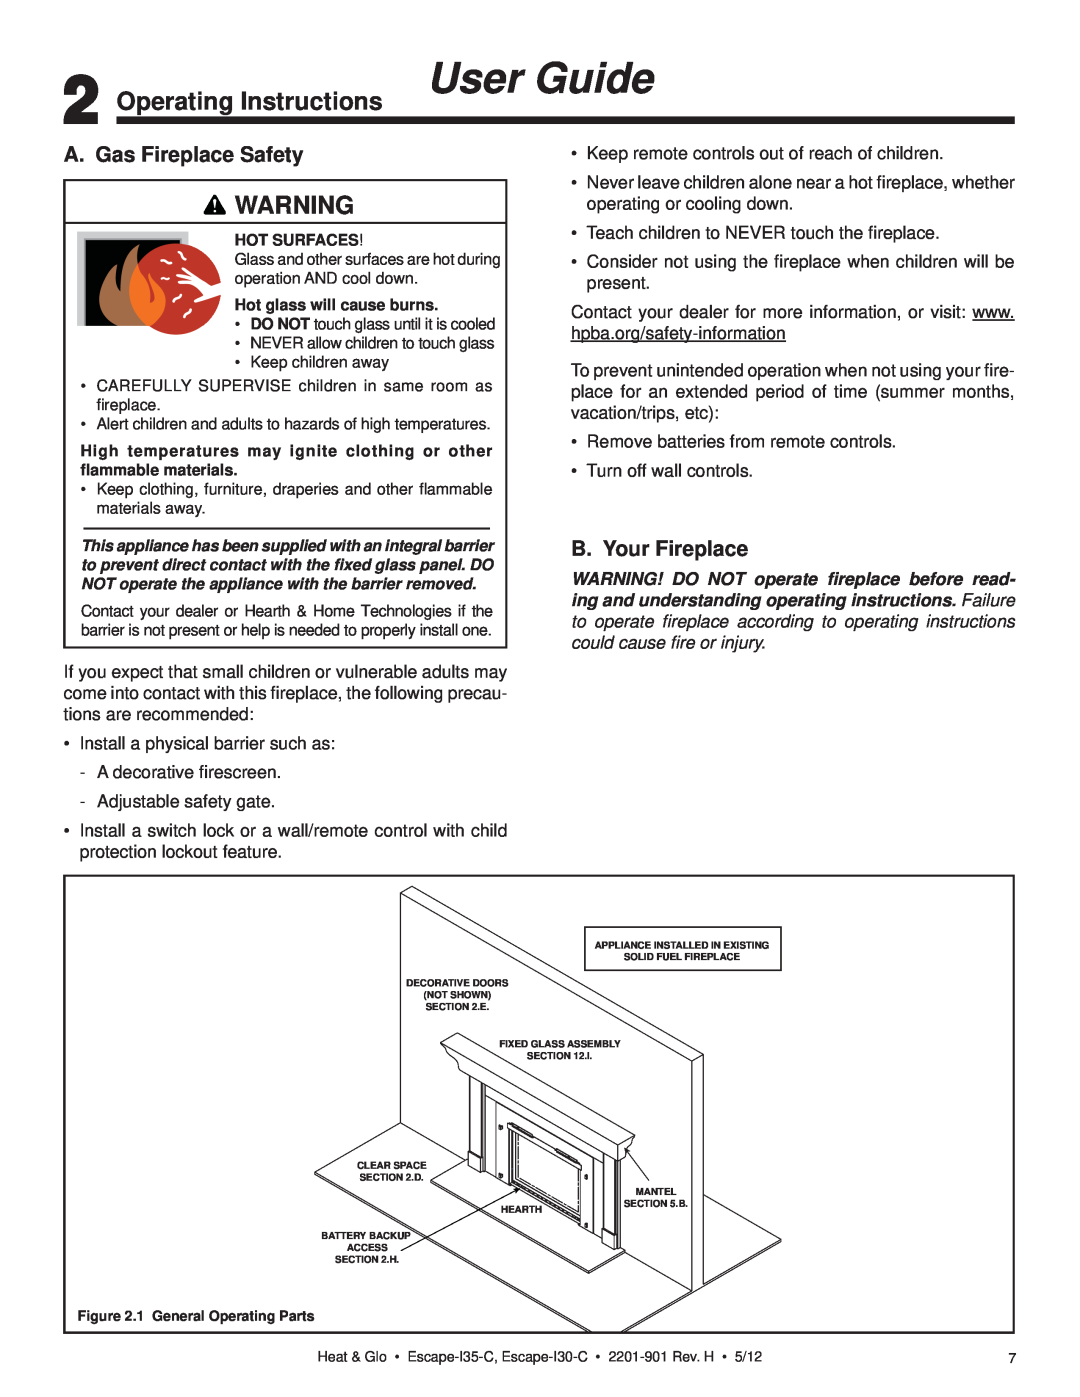 Heat & Glo LifeStyle ESCAPE-I35-C Operating Instructions User Guide, A. Gas Fireplace Safety, B. Your Fireplace 